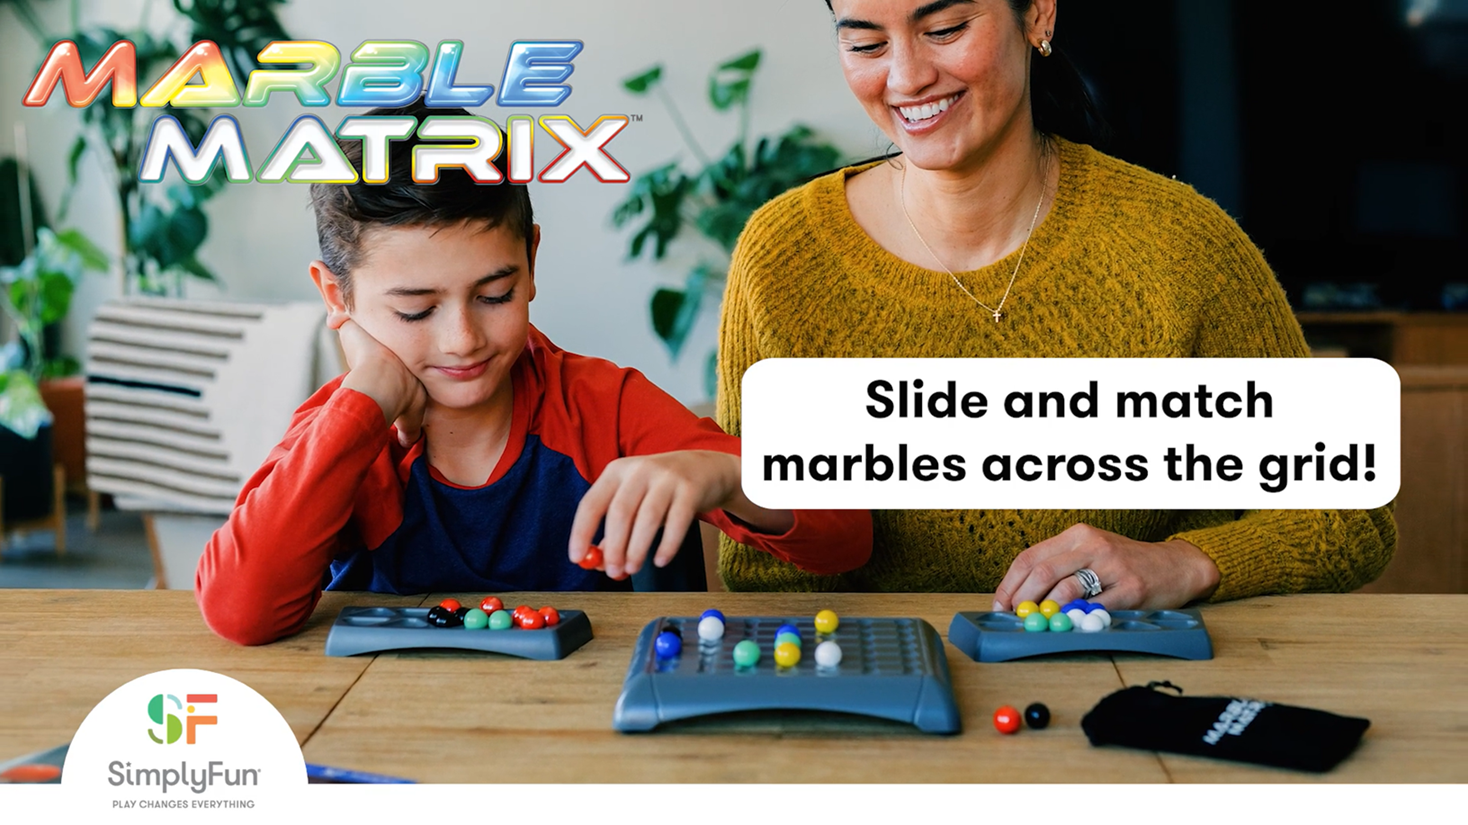 Load video: Marble Matrix Overview